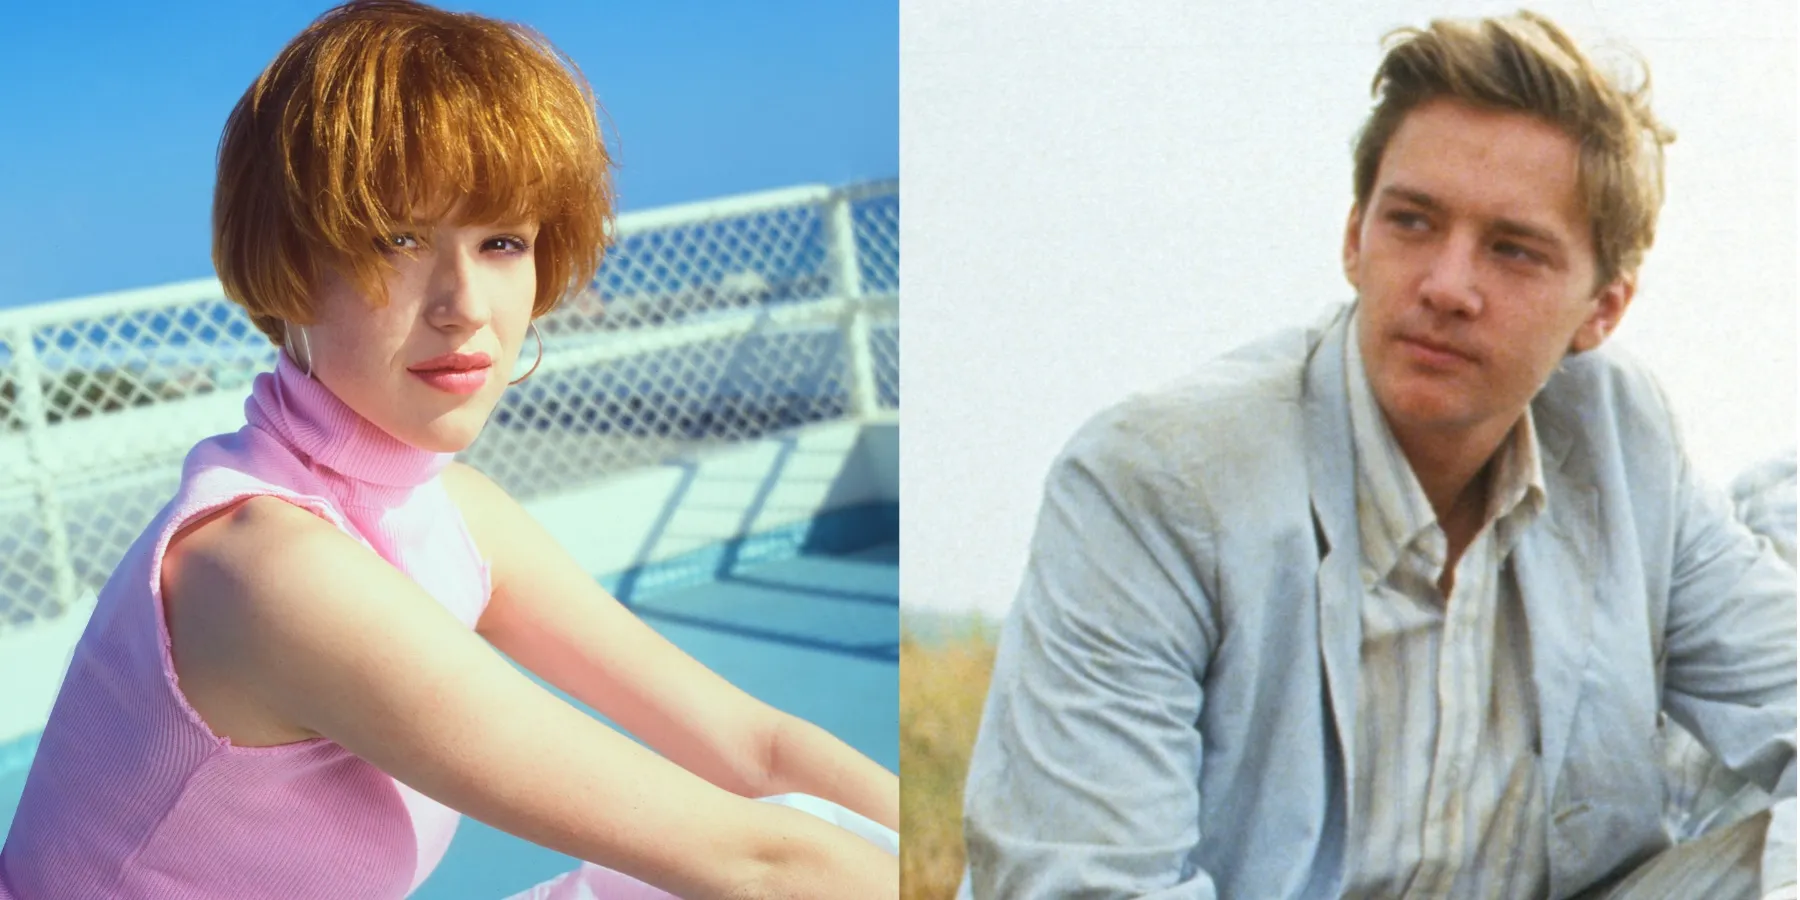 Molly Ringwald and Andrew McCarthy in side-by-side photos